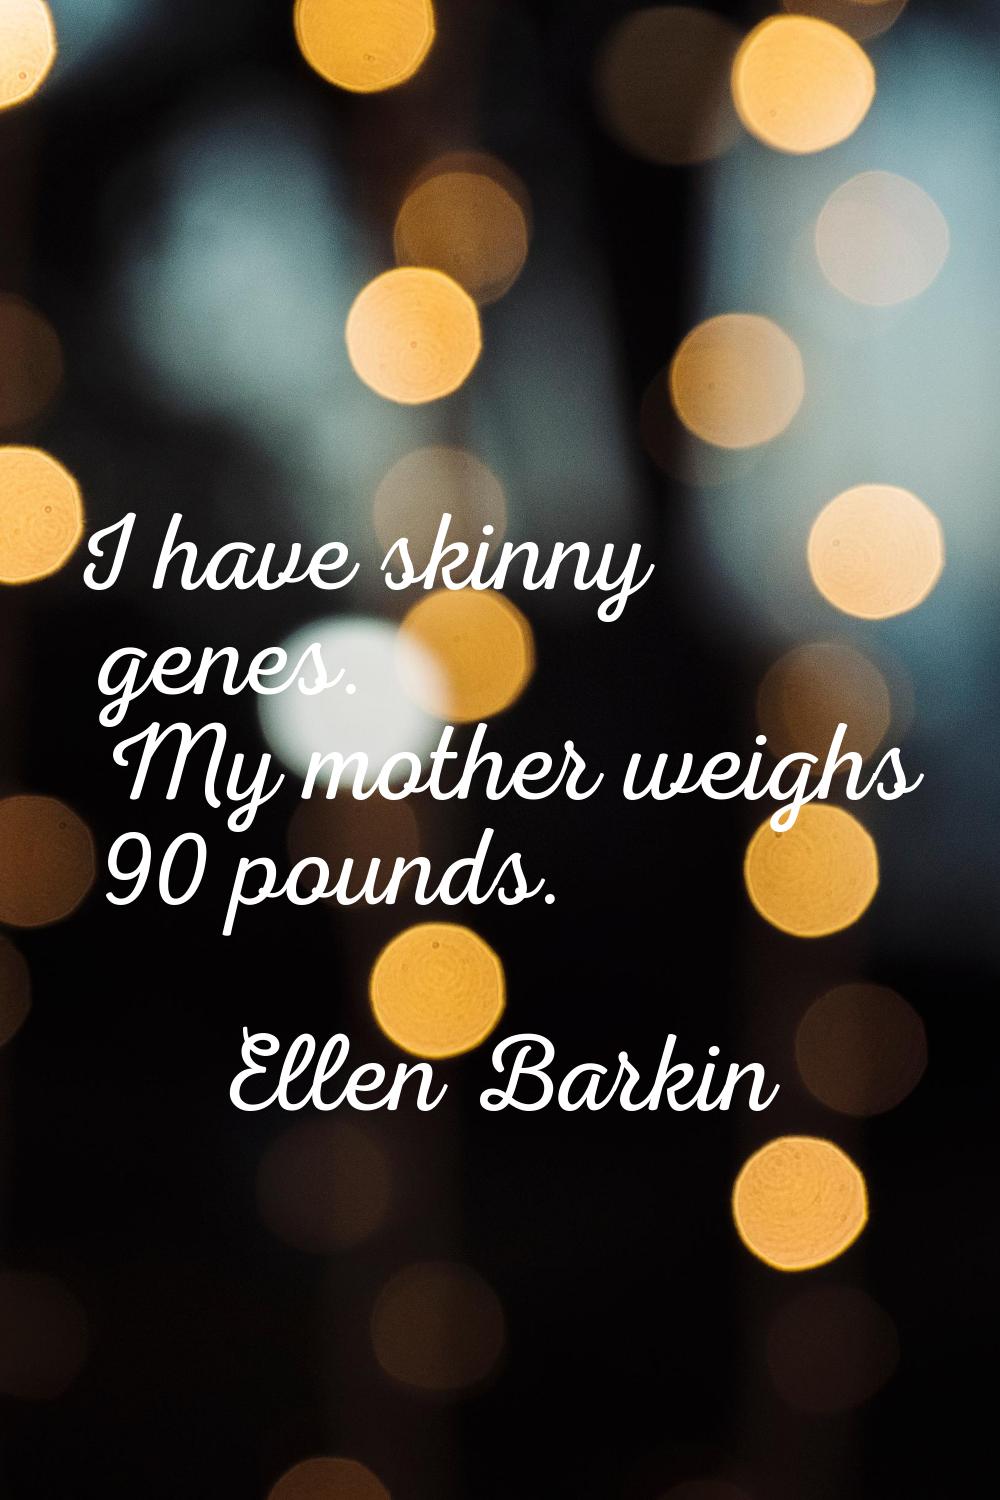 I have skinny genes. My mother weighs 90 pounds.